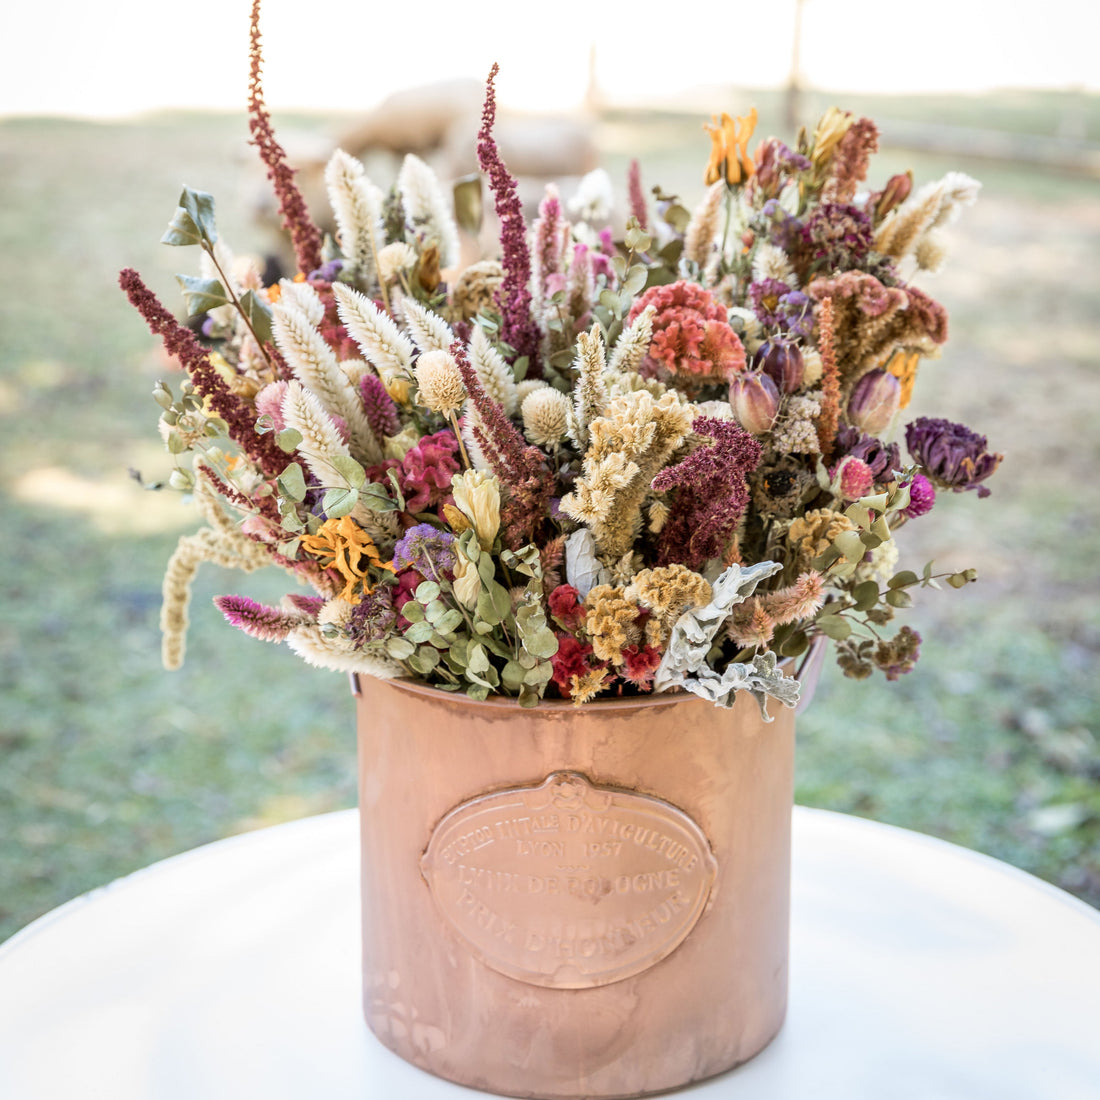 How to Make a Mixed Dried Flower Bouquet